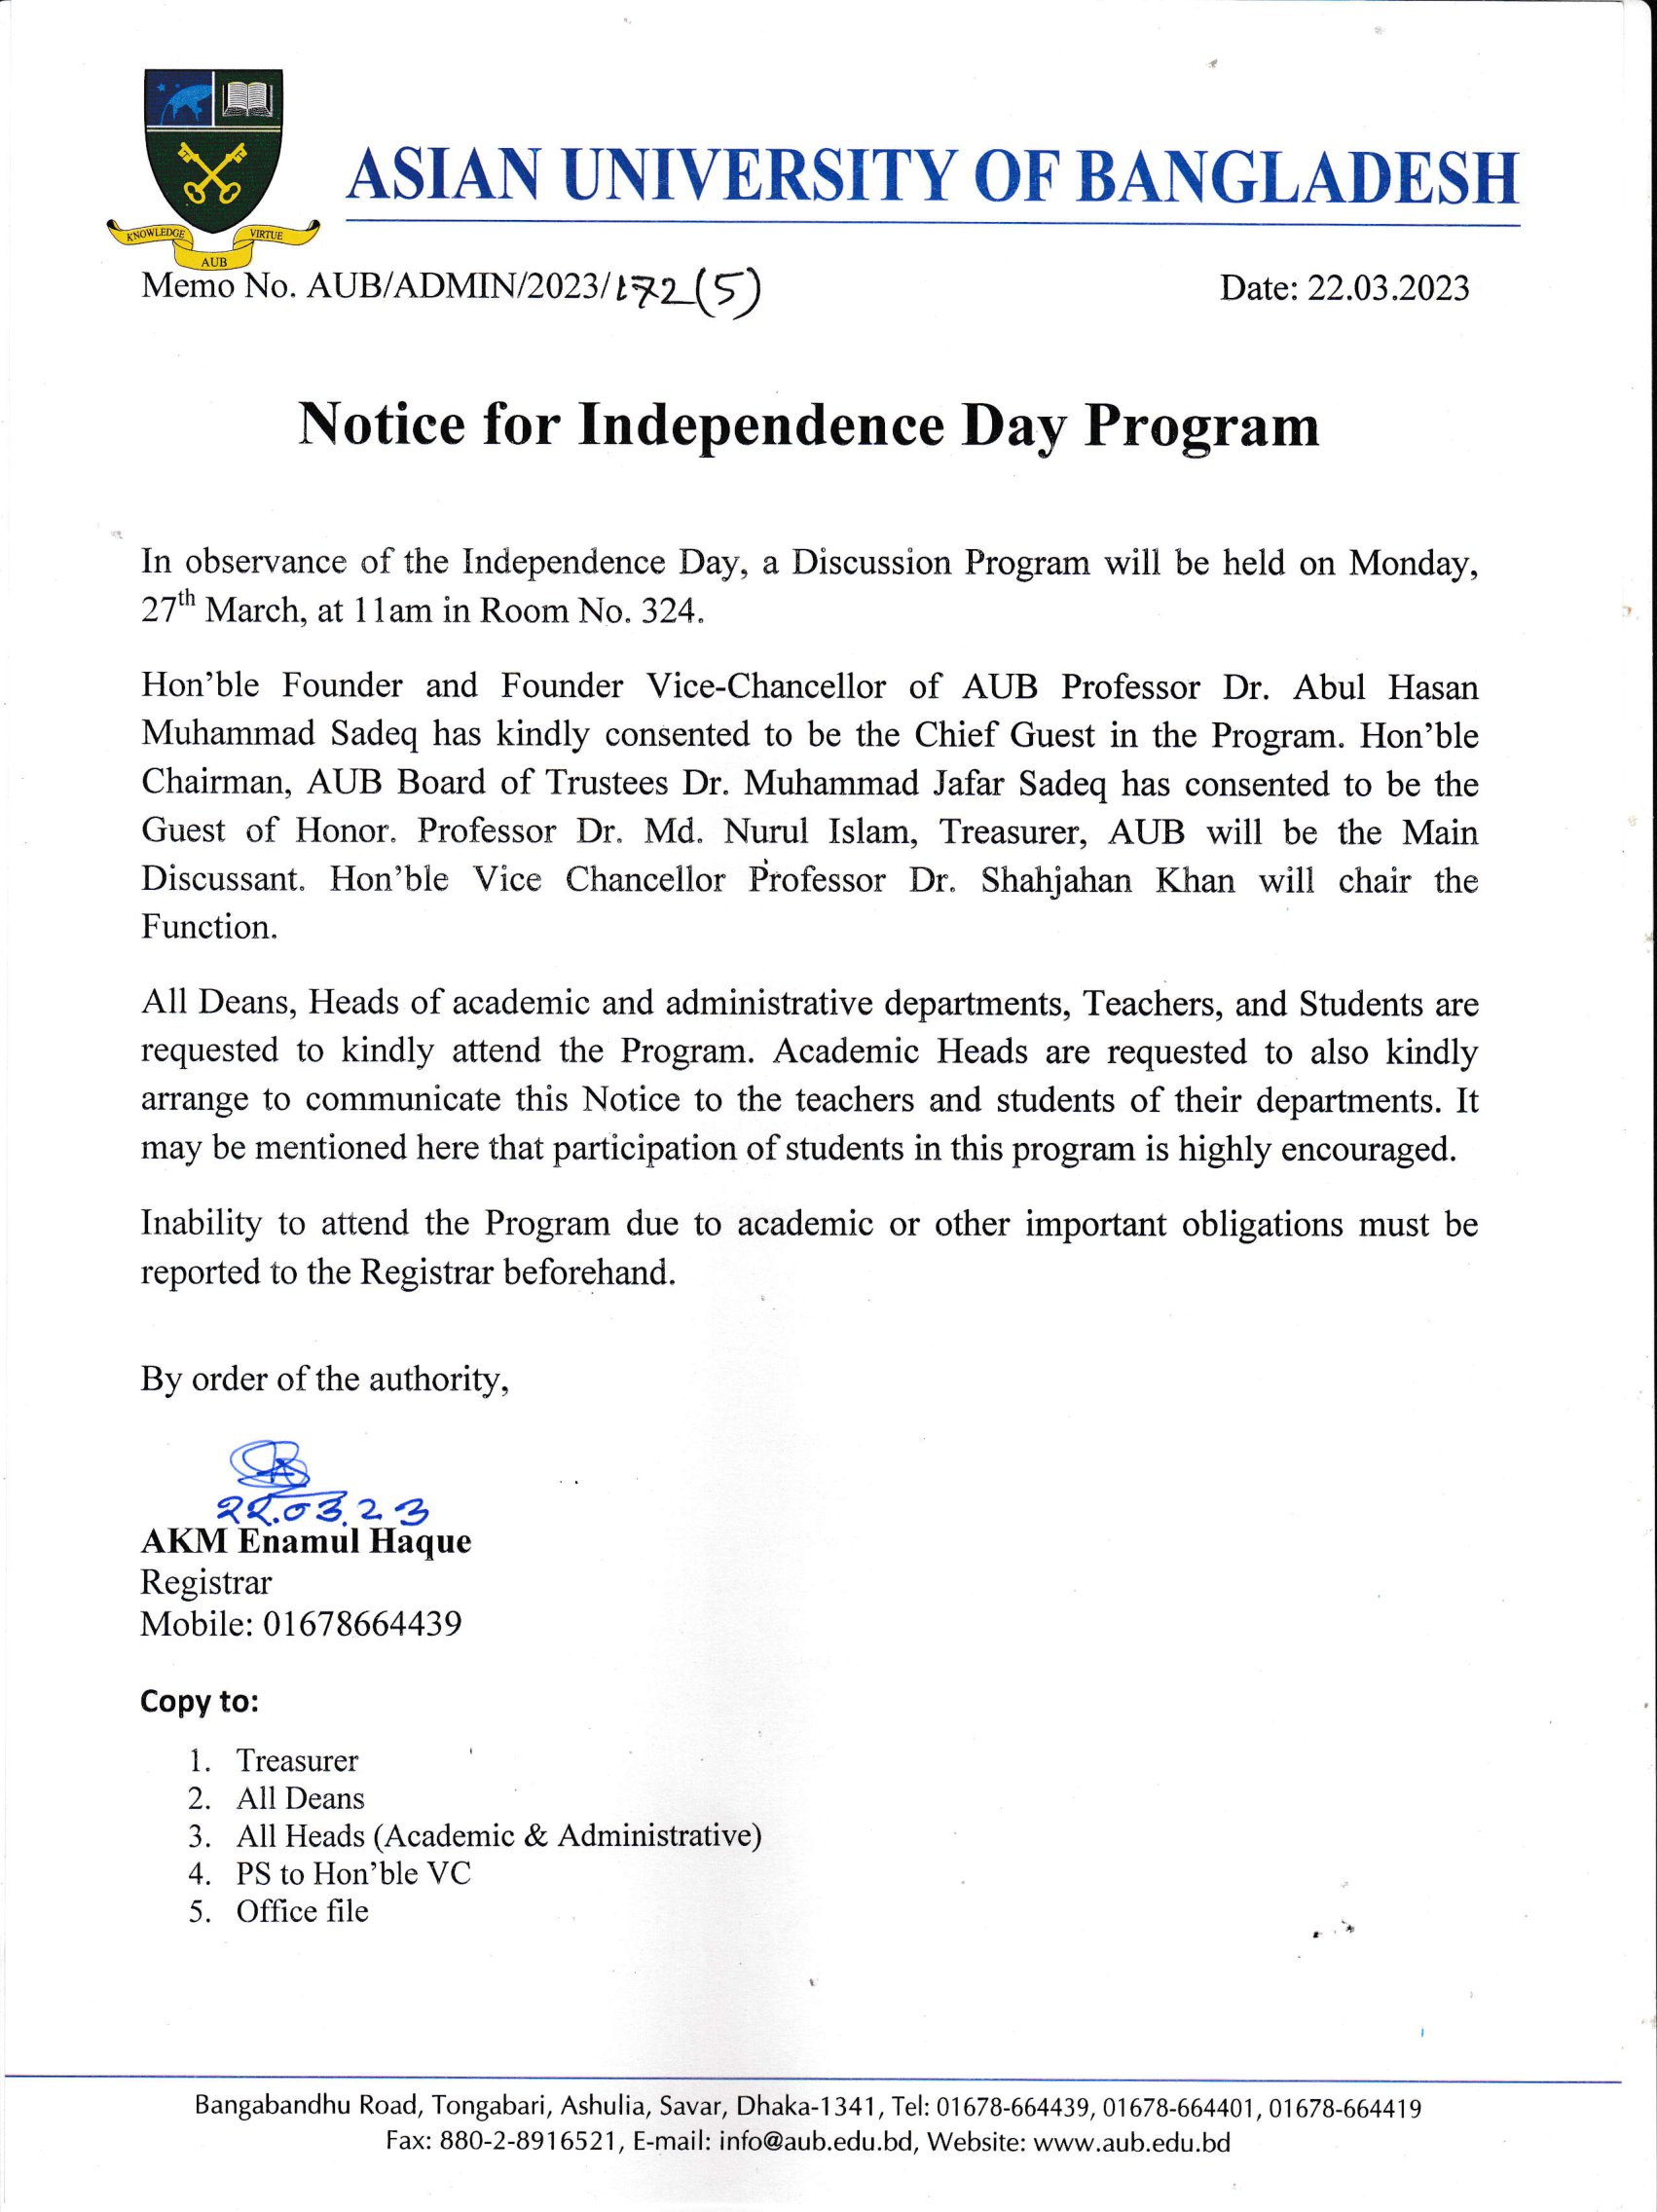 Notice for Independence Day Program in AUB image